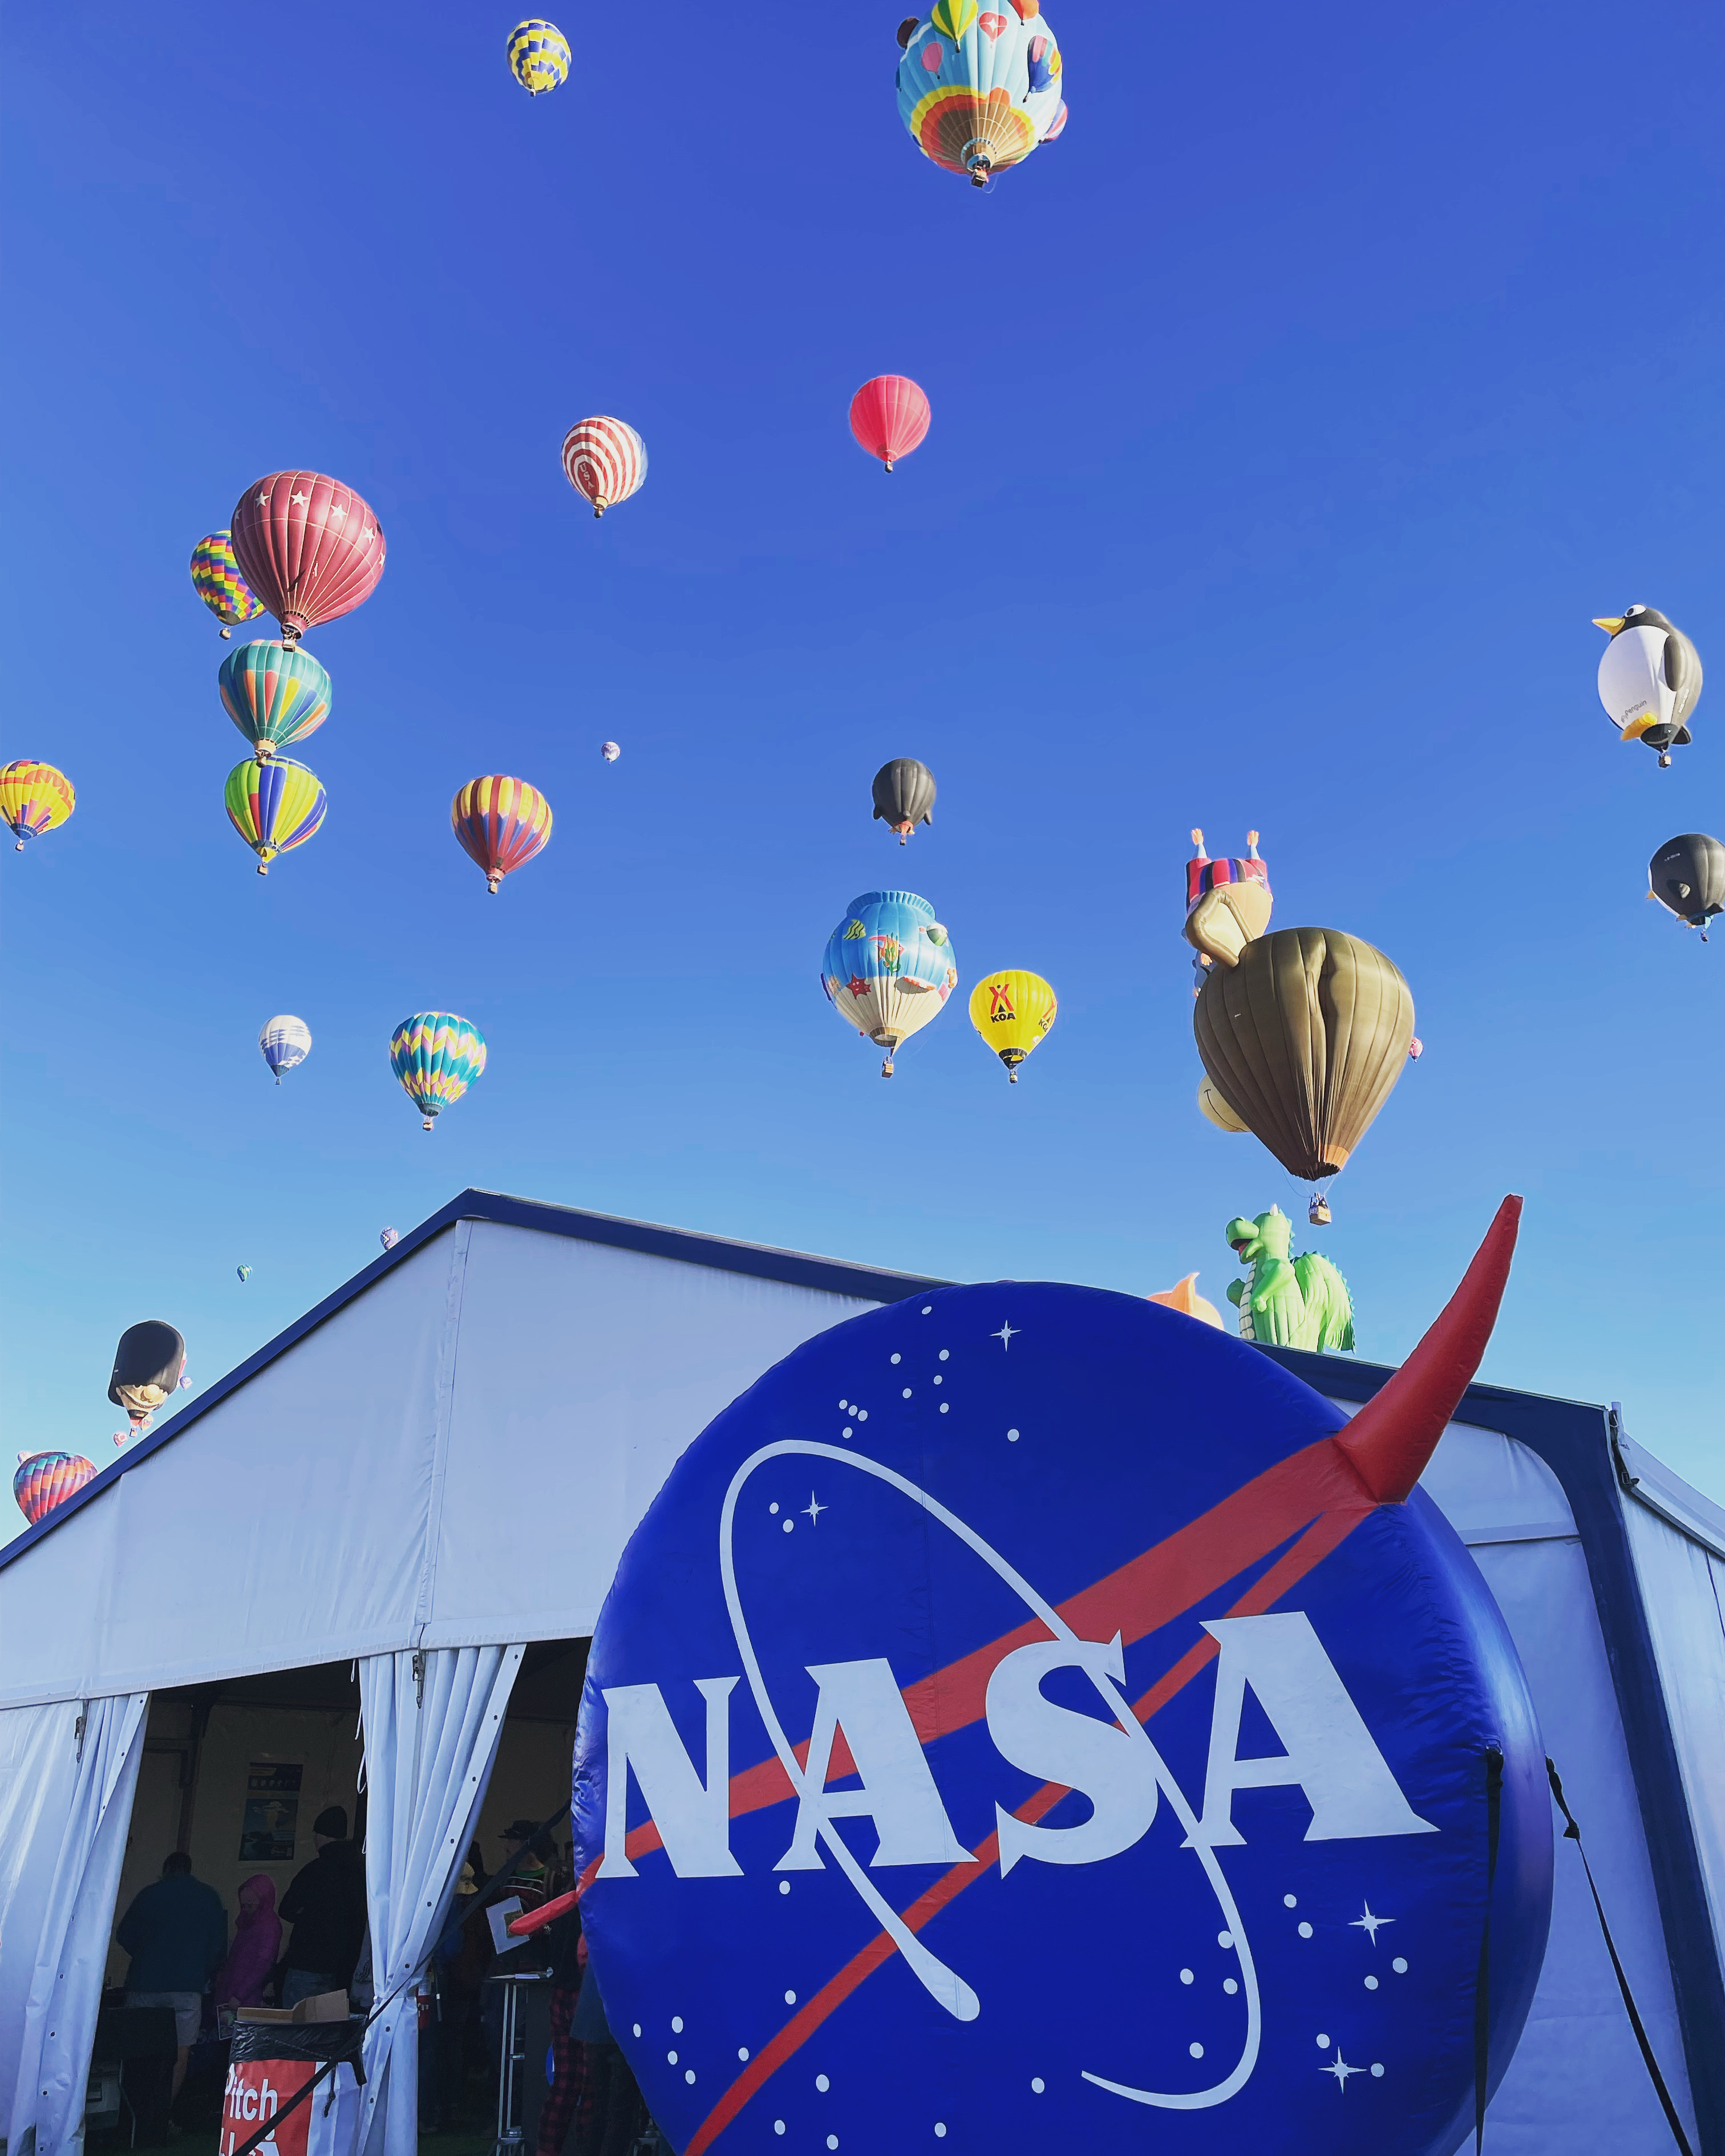 A three-dimensional NASA blue meatball logo stands on the ground outside a white fair tent the size of a big house. In the clear blue sky above float twenty-two hot air balloons of all colors.